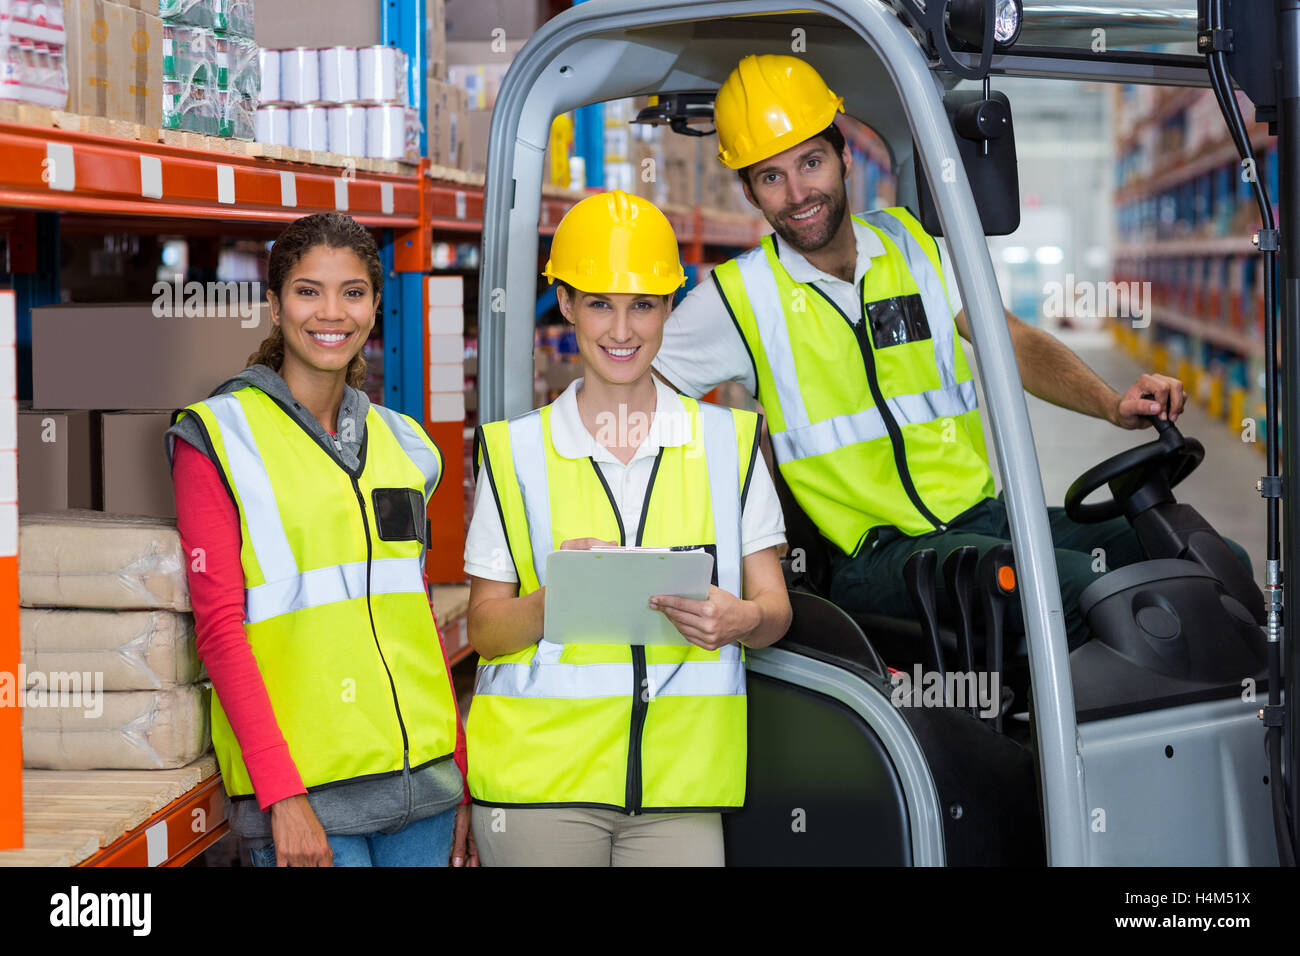 Male and female workers smiling together Stock Photo